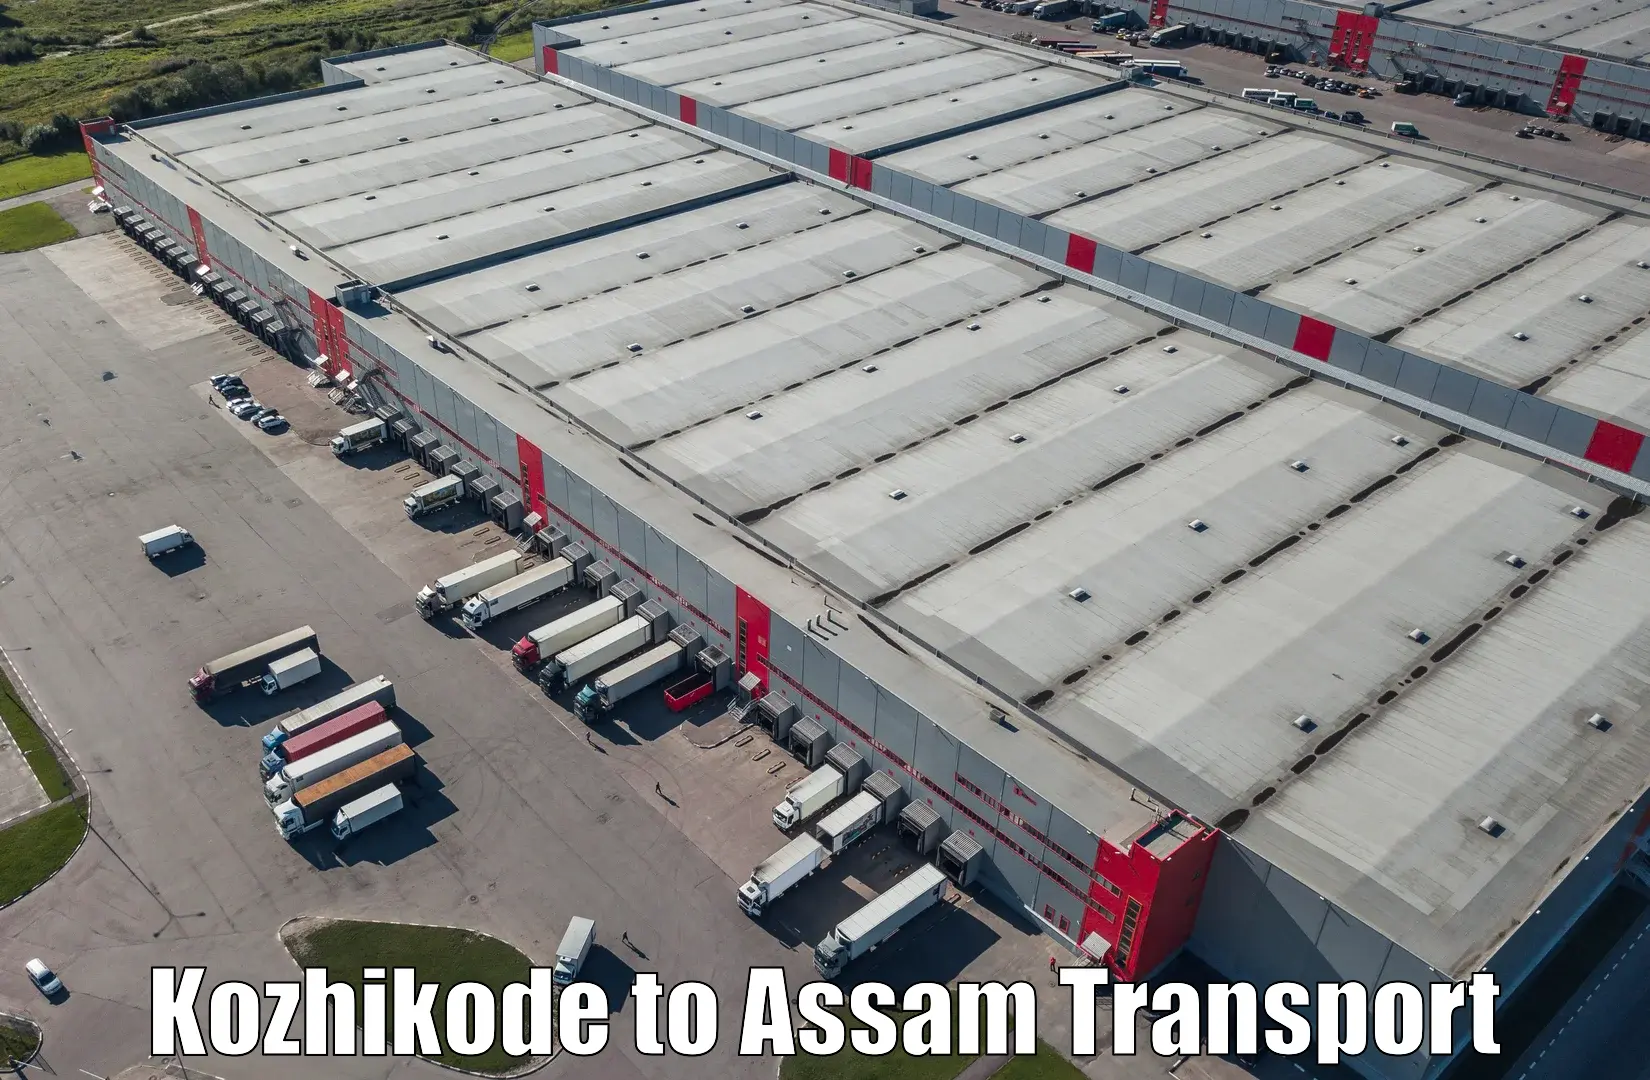 Delivery service Kozhikode to Assam